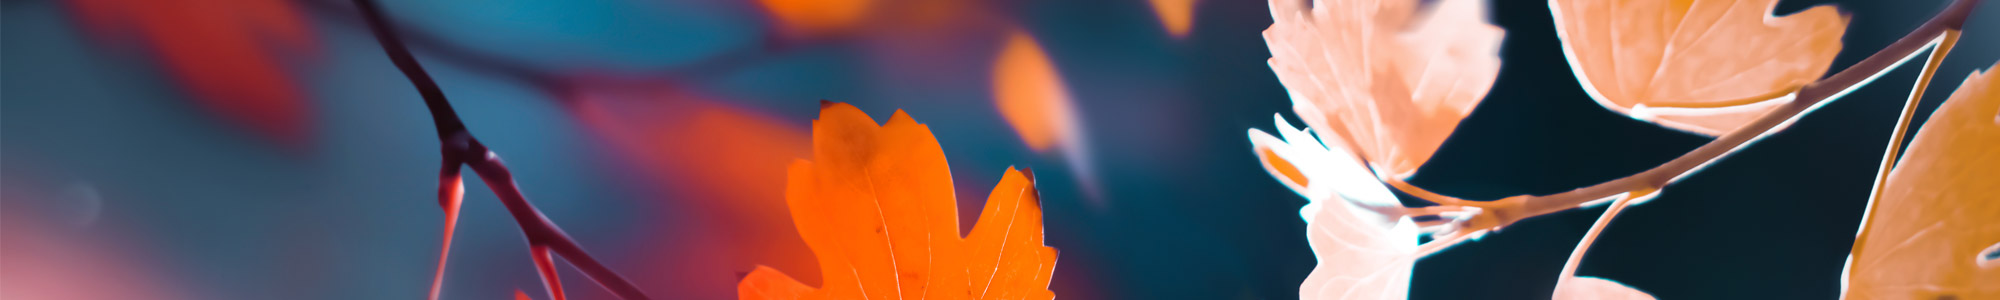 close up of sunlight coming through autumn leaves